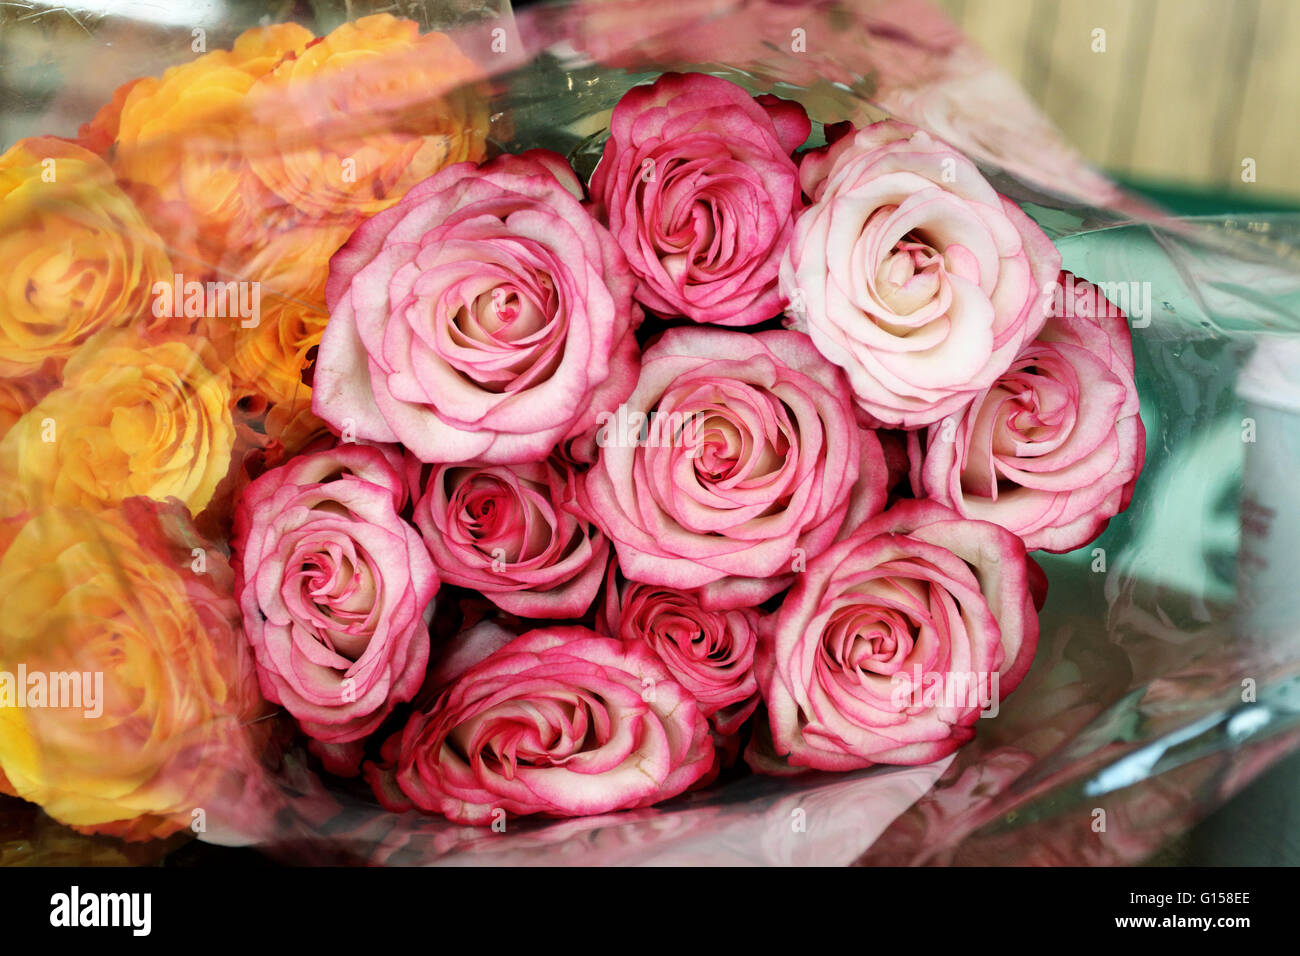 Close up of bouquet of orange and pink roses Stock Photo